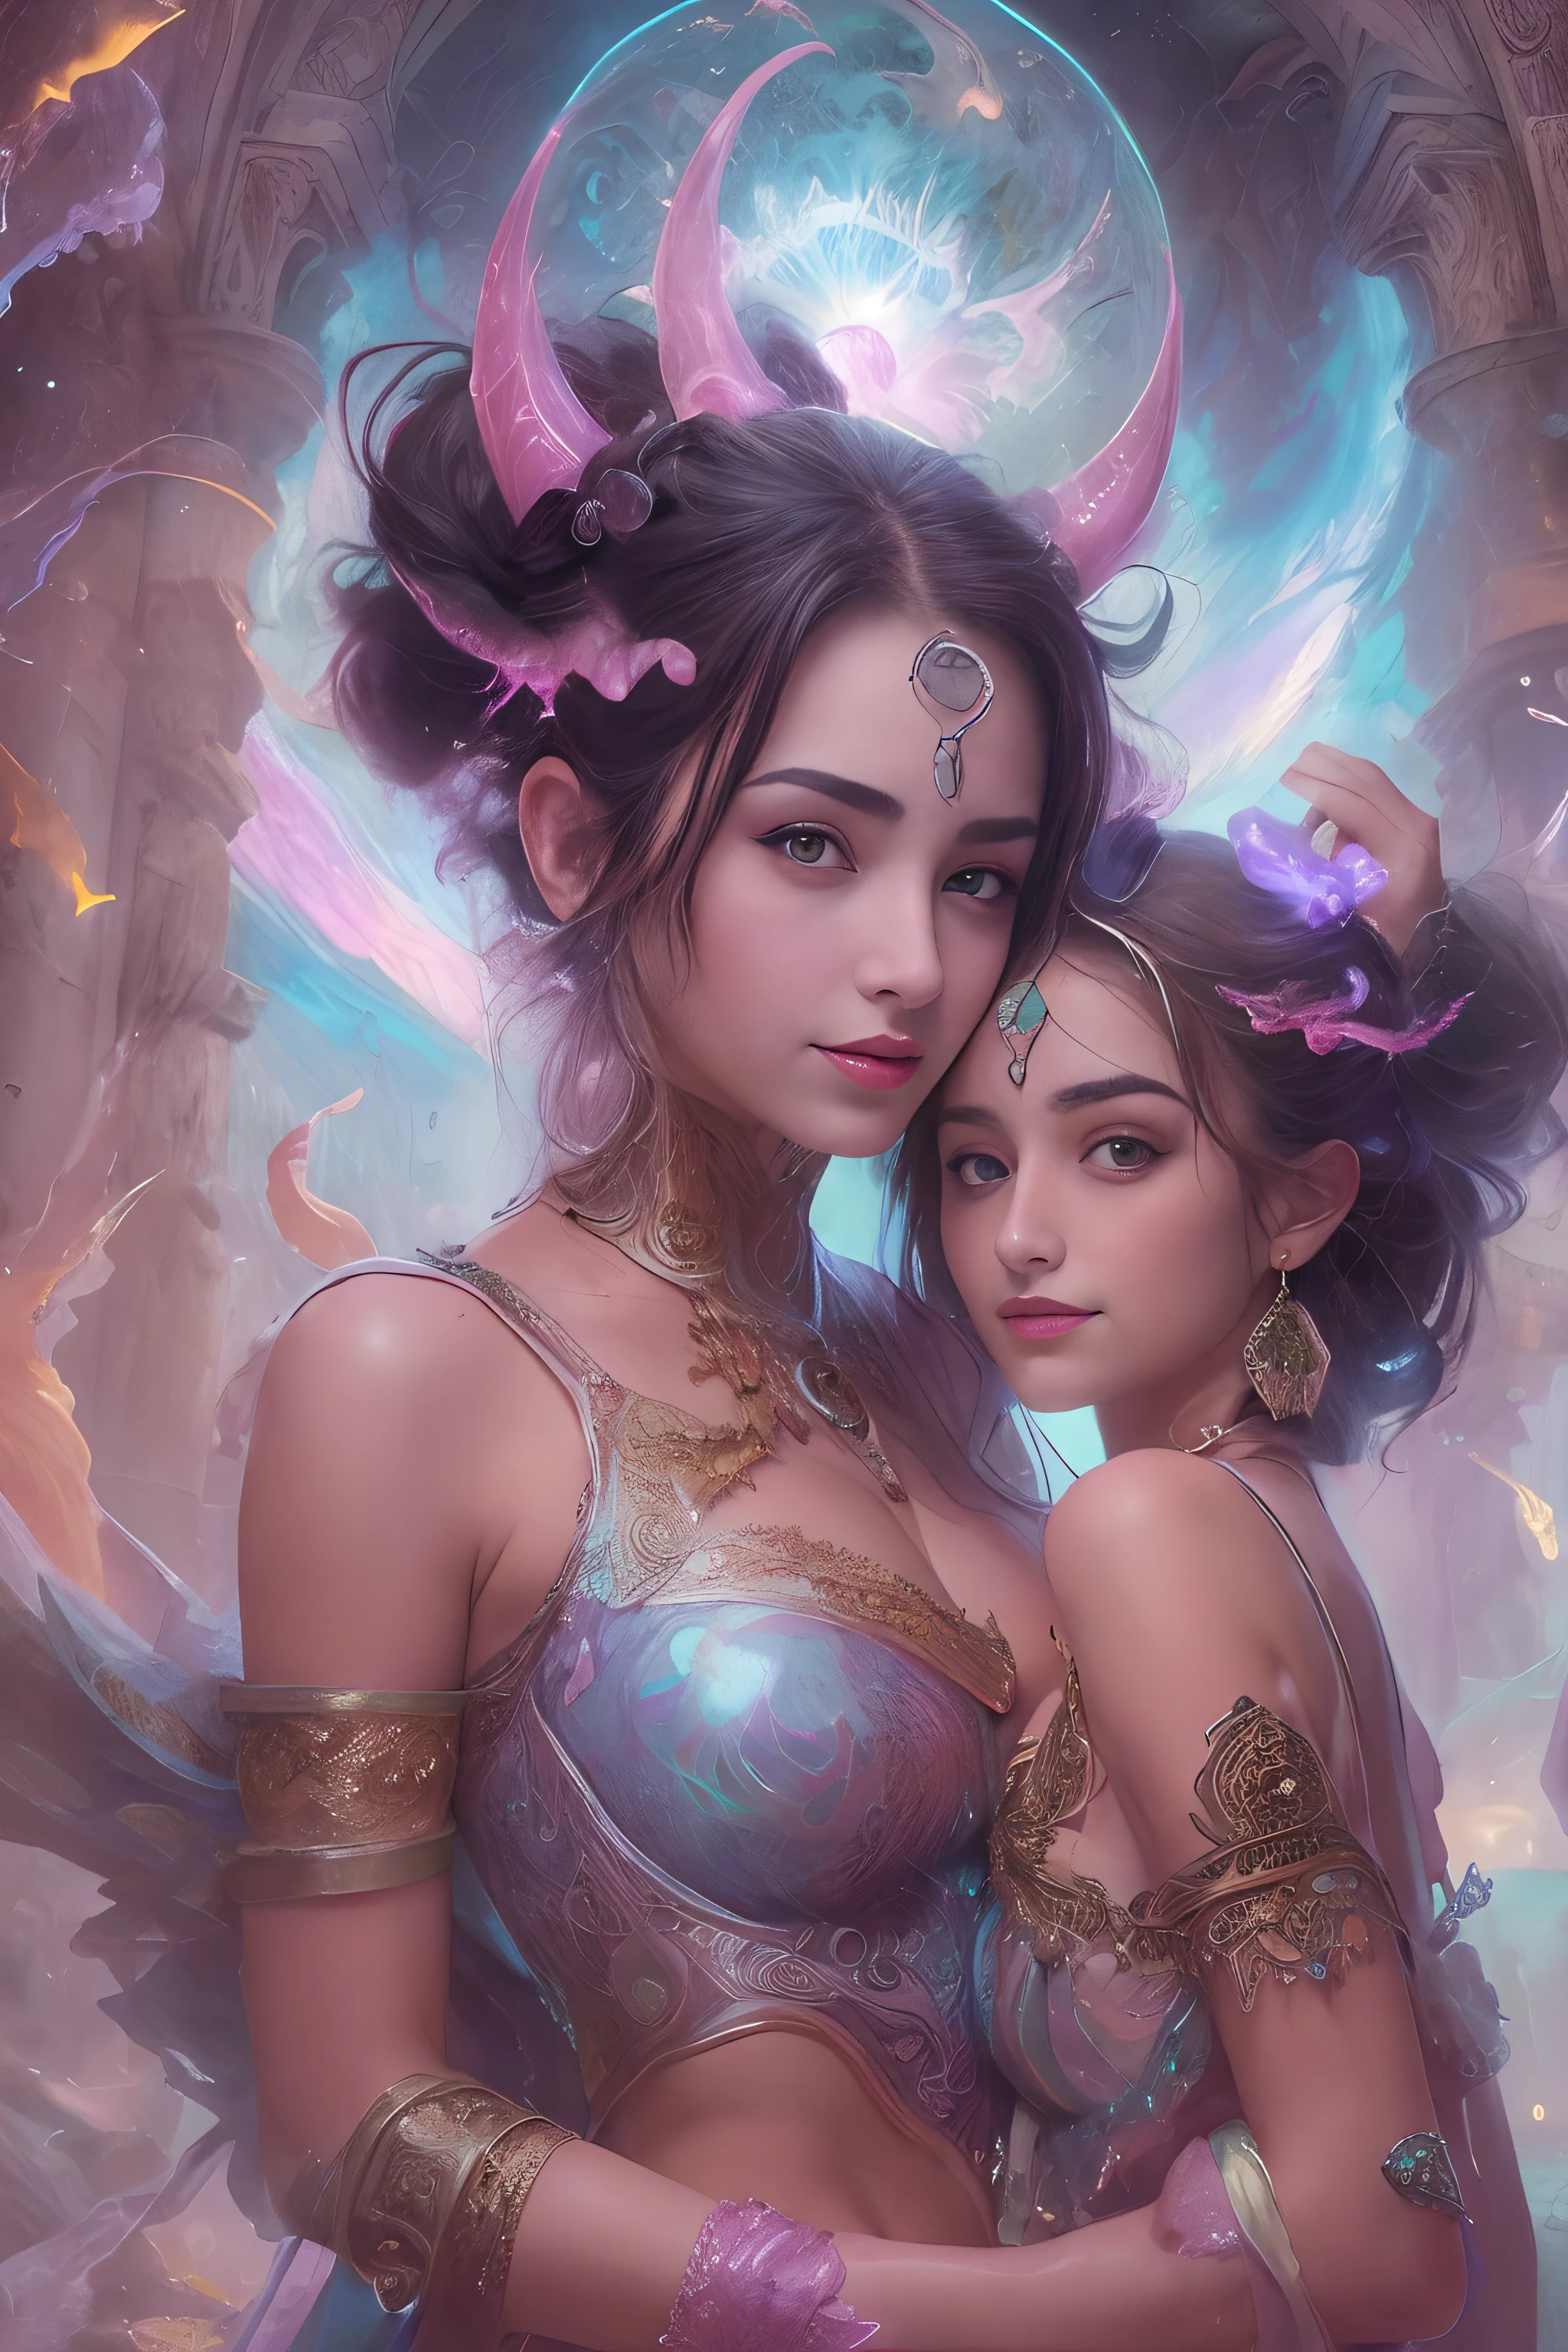 (Two beautiful teenage italian girls:1.6), Close friends, (They are hugging each other:1.2), Kiss her cheek or chest,(Detailed iridescent bodysuit with beautiful fractal or marble design:1.5)Incredible and spectacular scenes, ((High quality)), ((Detailed)), ((Fantasy)), Blue Plasma Brain, Green Plasma Body, Vulgarity, beutiful breast, (Open legs:1.4), obscenity, (Lewd smile:1.2), coarse, Obscene, mean, (raunchy:1.2), (Immoral:1.2), Lachish, (small breasts with beautiful raised pink areolas,,:1.5), (Cameltoe), (Expression of ecstasy:1.2), Photorealistic, Official art, unity 8k wall paper, 8K Portrait, Best Quality, Very high resolution, (Incredibly beautiful nature background:1.6), (18 years old:1.5), (Sexy and glamorous:1.1), (A coquettish expression:1.6), (seductively smiling:1.6), (Full body), (erotic posing:1.5), Beautiful seductive face, Portrait, (Thick eyebrows:1.5), (Big purple eyes:1.2), Beautiful eyes with fine symmetry, (Ultra detailed eyes:1.4), (High resolution eyes:1.1), Intimate face, (ultra detailed skin texture:1.4), White skin, pale skin, Perfect Anatomy, Thin, (Beautiful toned body:1.1), Hair Bow, (Moist skin:1.1), full of sweat, No makeup, dark circles, Good anatomy, Focus Face, good-looking, (Emilia Clark:0.6) (Emma watson:0.3),(Jennifer Connelly:0.4), (sensual face:1.5), Elegant face, Nice, Dolce, Blurred back((looks up)), ((Looking down)), (Around her neck is a simple necklace of exquisite workmanship), (Bioluminescence with brilliant brilliance:1.3), (Use fancy flame magic:1.2), (Swirling flames), The Great Temple of the Devil, The Devil's Grand Shrine, great temple, great cathedral, temple ruins, detached temple, (Luminous magic circle), Ruins of an ancient castle, Shining majestic cloud masses and sky, lightning bolt, Epic Realistic, Faded, Art Book, (Greg Rutkowski:0.8), (teal and orange:0.4), (Art Station:1.5), Cinematic, ((Neutral colors)), (nffsw:1.5), (Muted colors:1.2), Hyper Detailed, Dramatic light, (Intricate details:1.1), Complex b